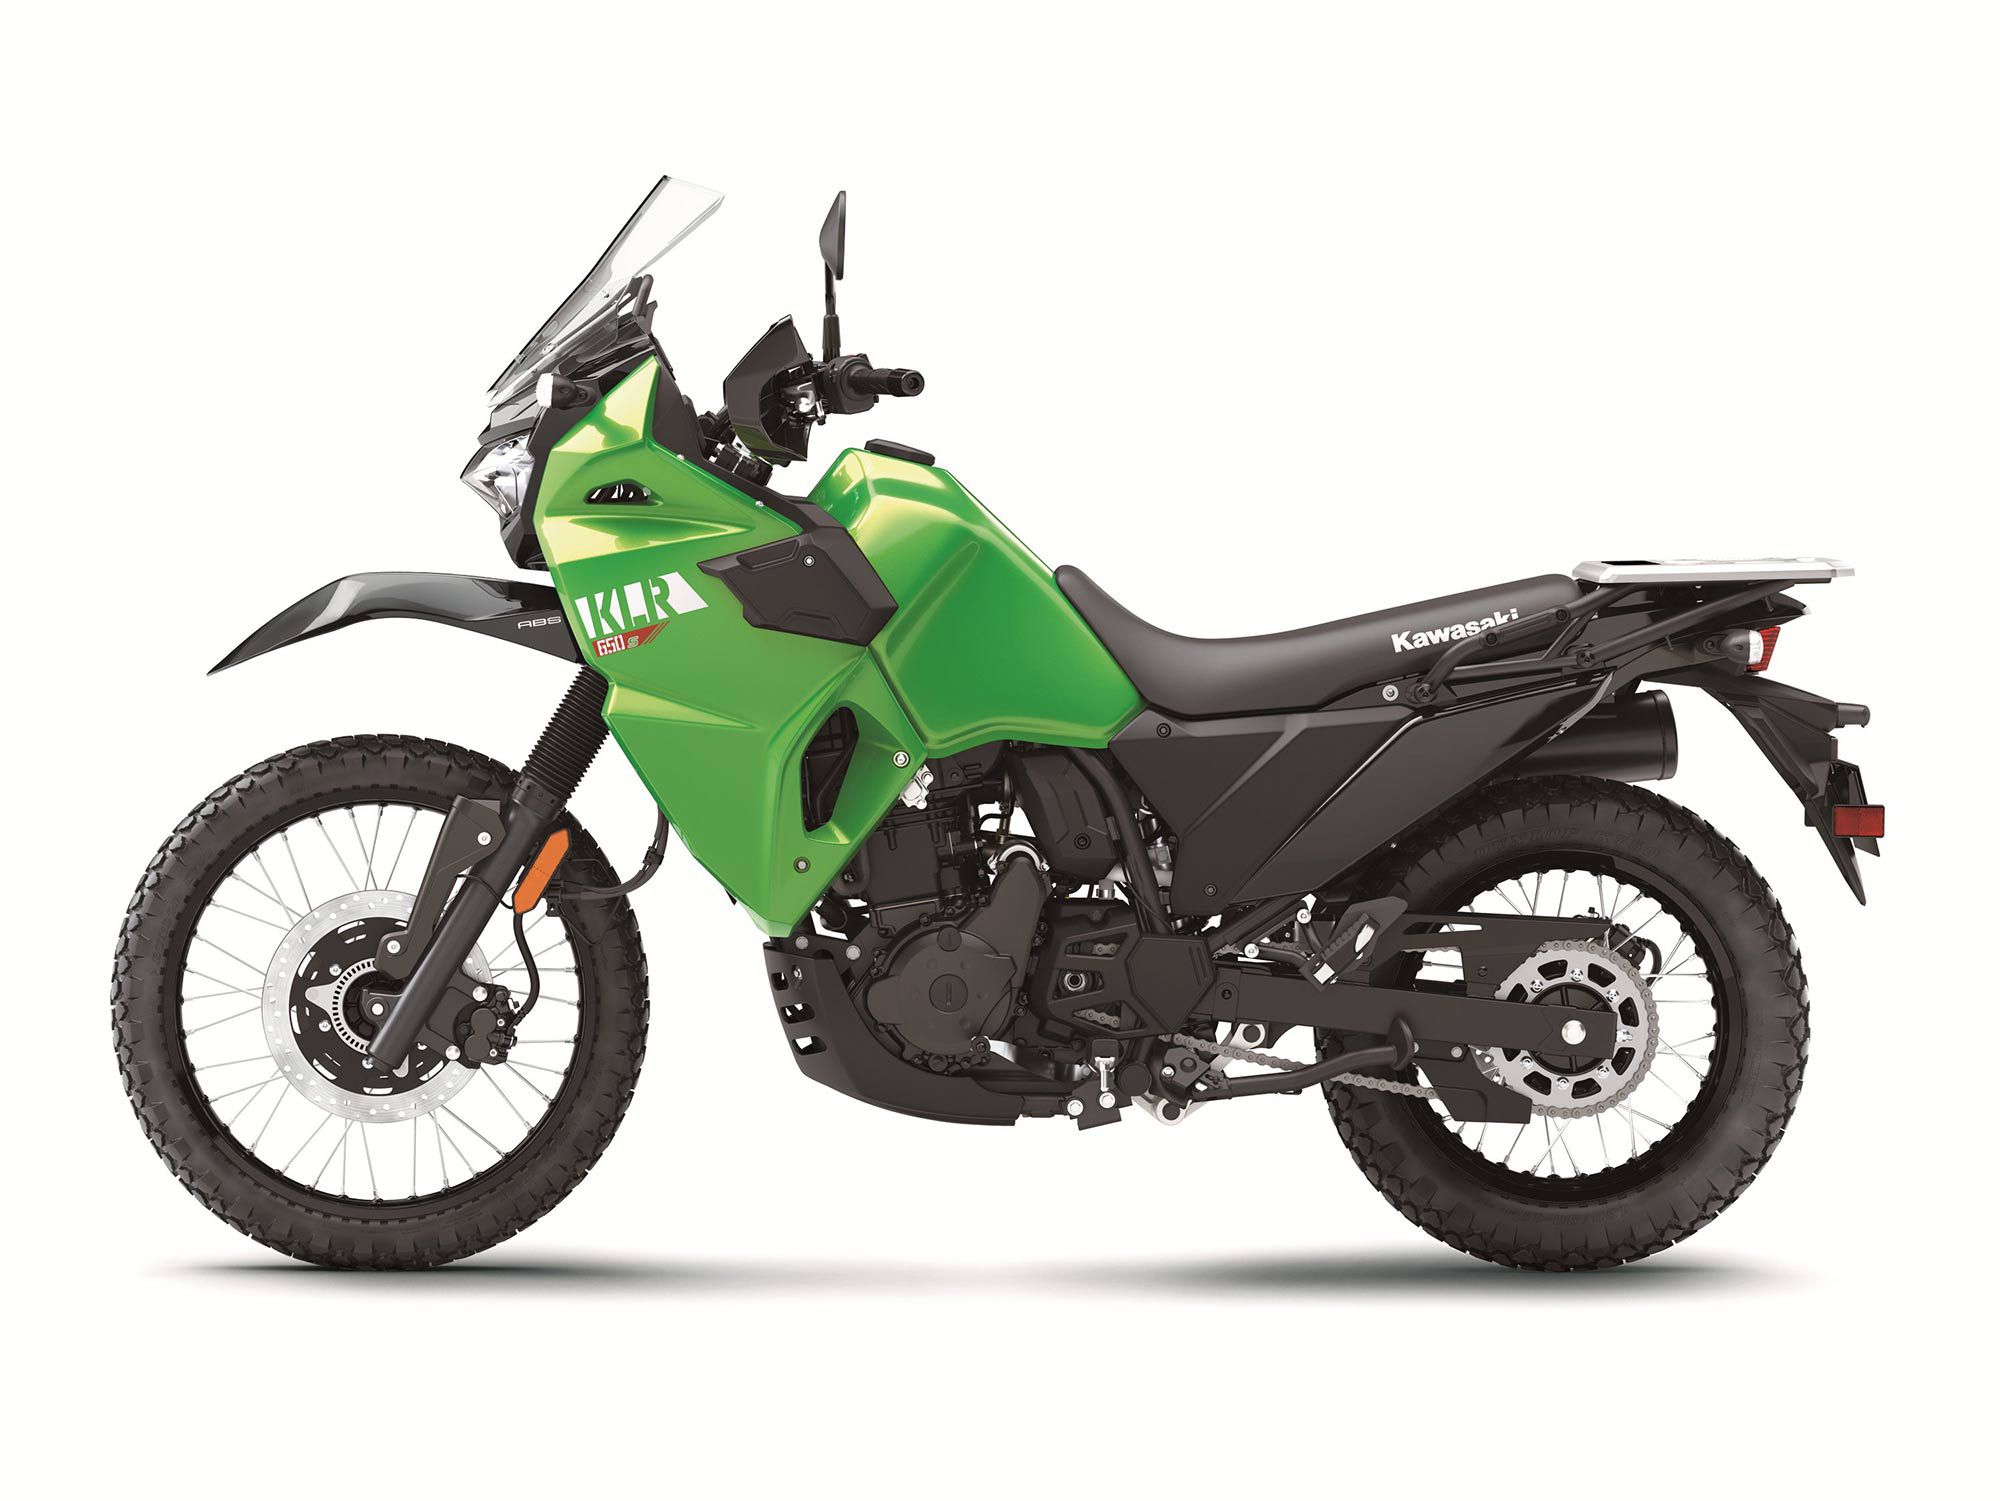 The non-ABS KLR650 S comes in Candy Lime Green (depicted) or Pearl Storm Gray for an MSRP of $6,899.